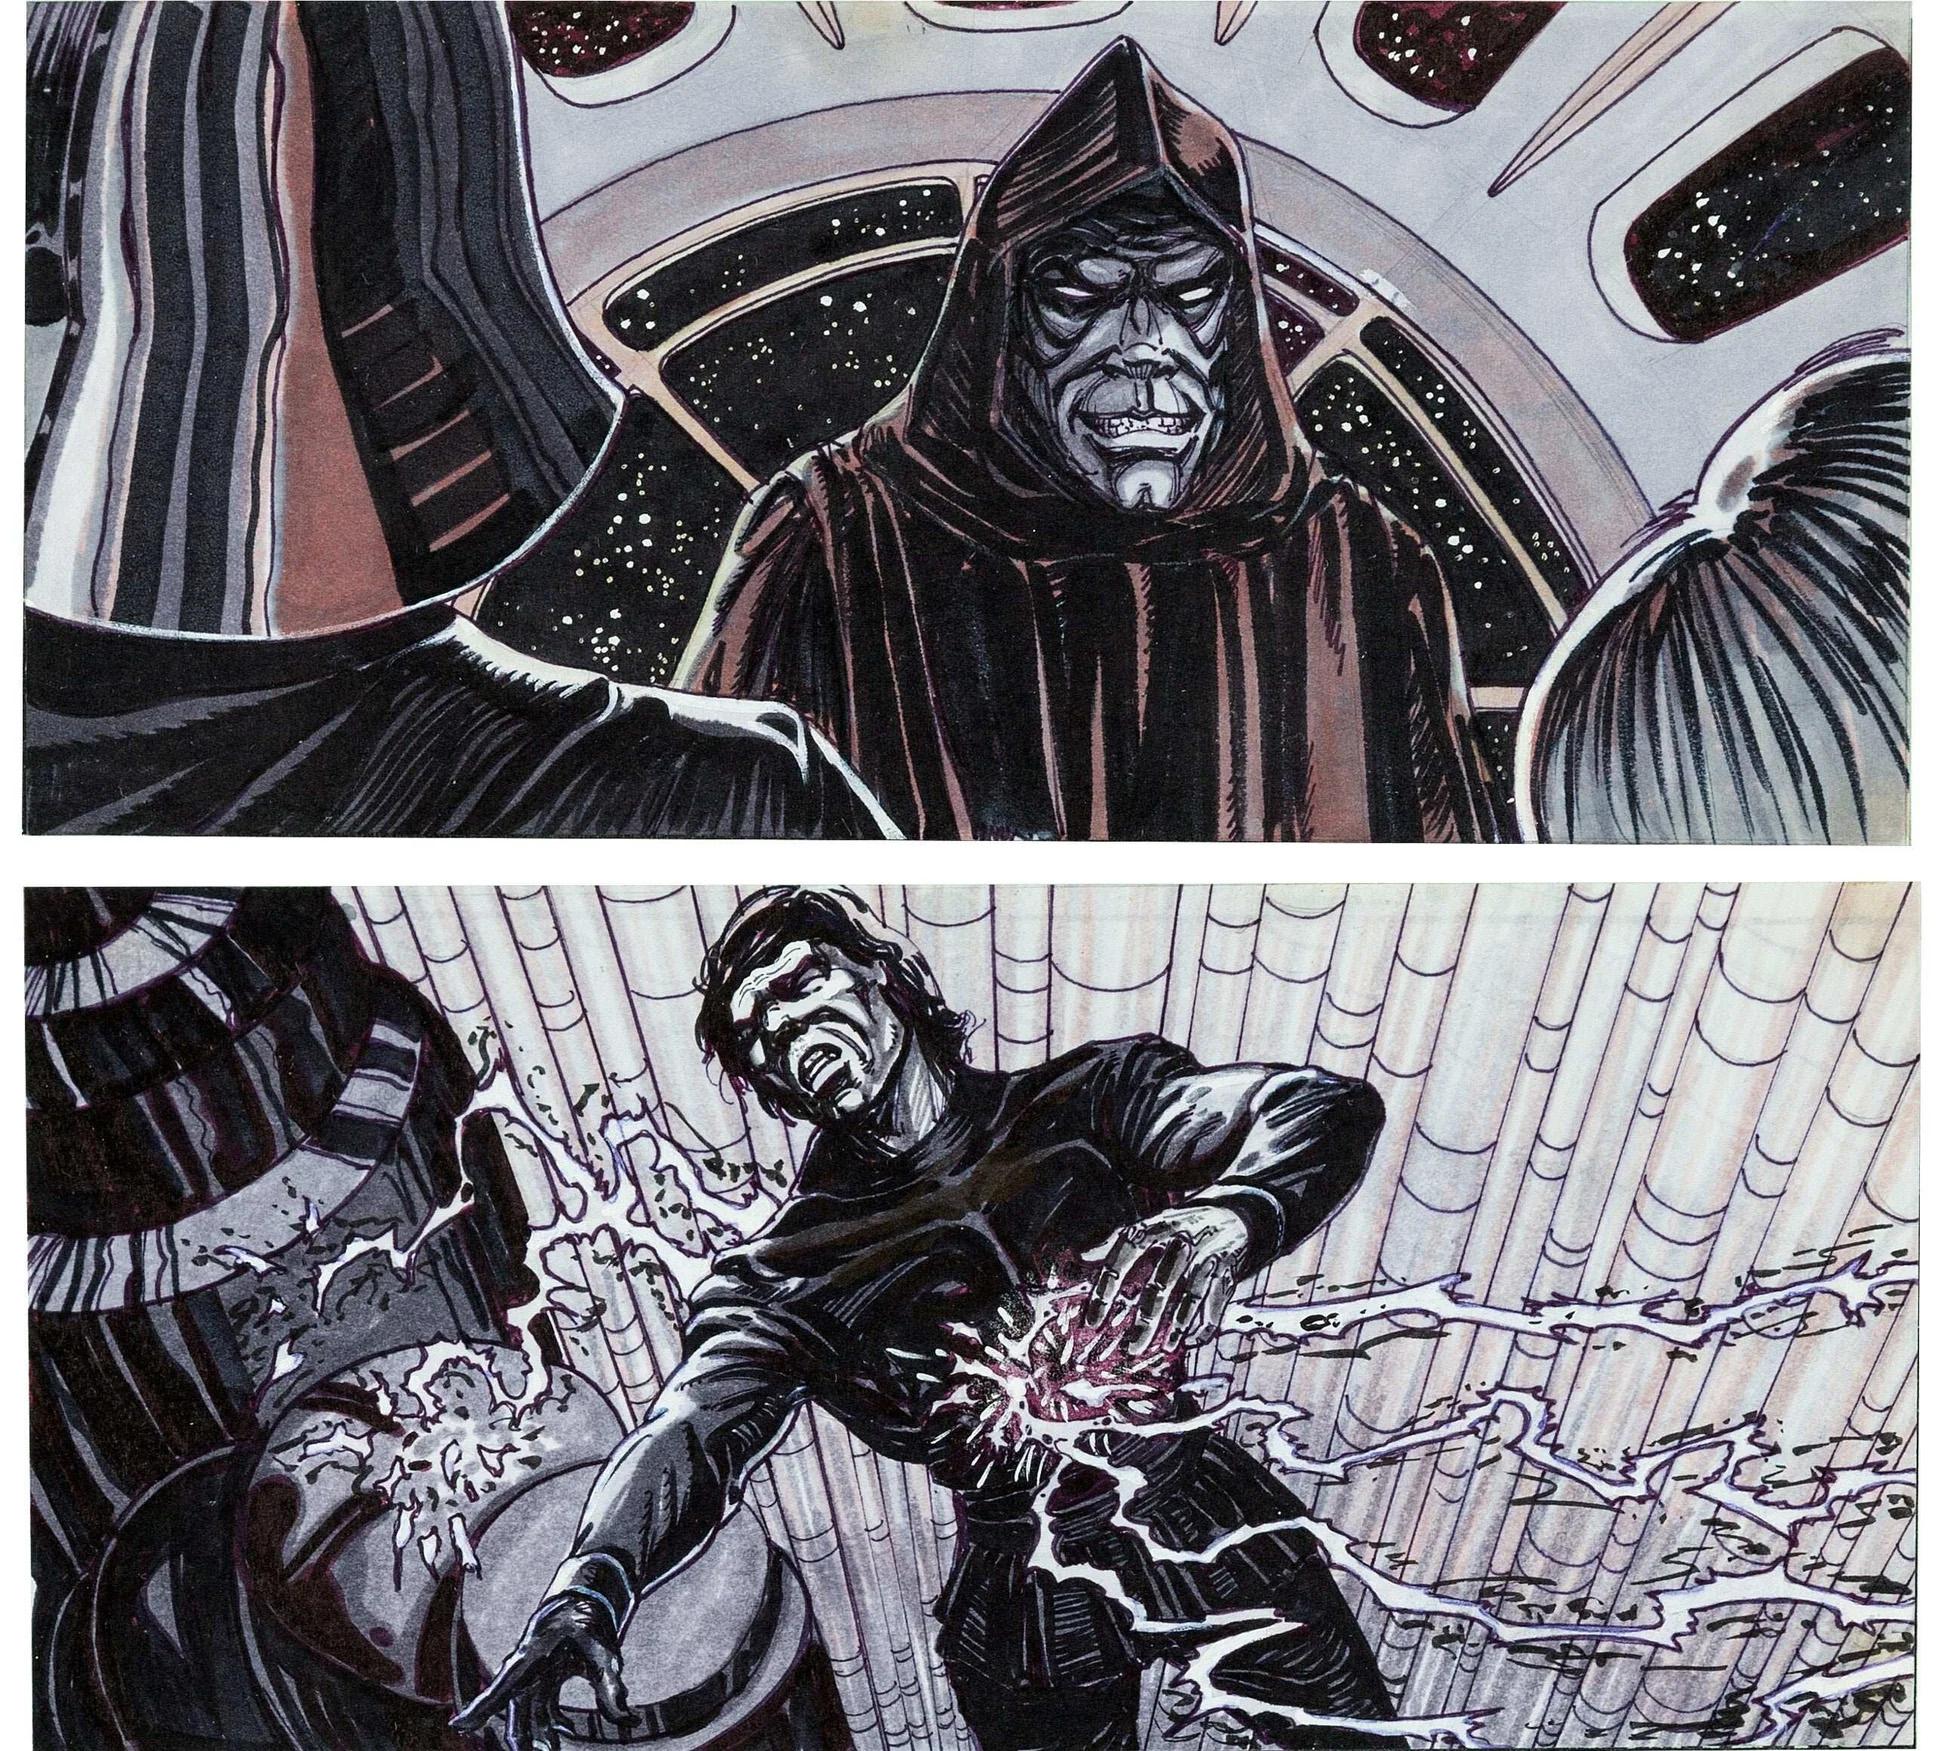 Star Wars Ep. VI: Return of the Jedi Luke Skywalker and The Emperor Storyboards - Art by David Russell